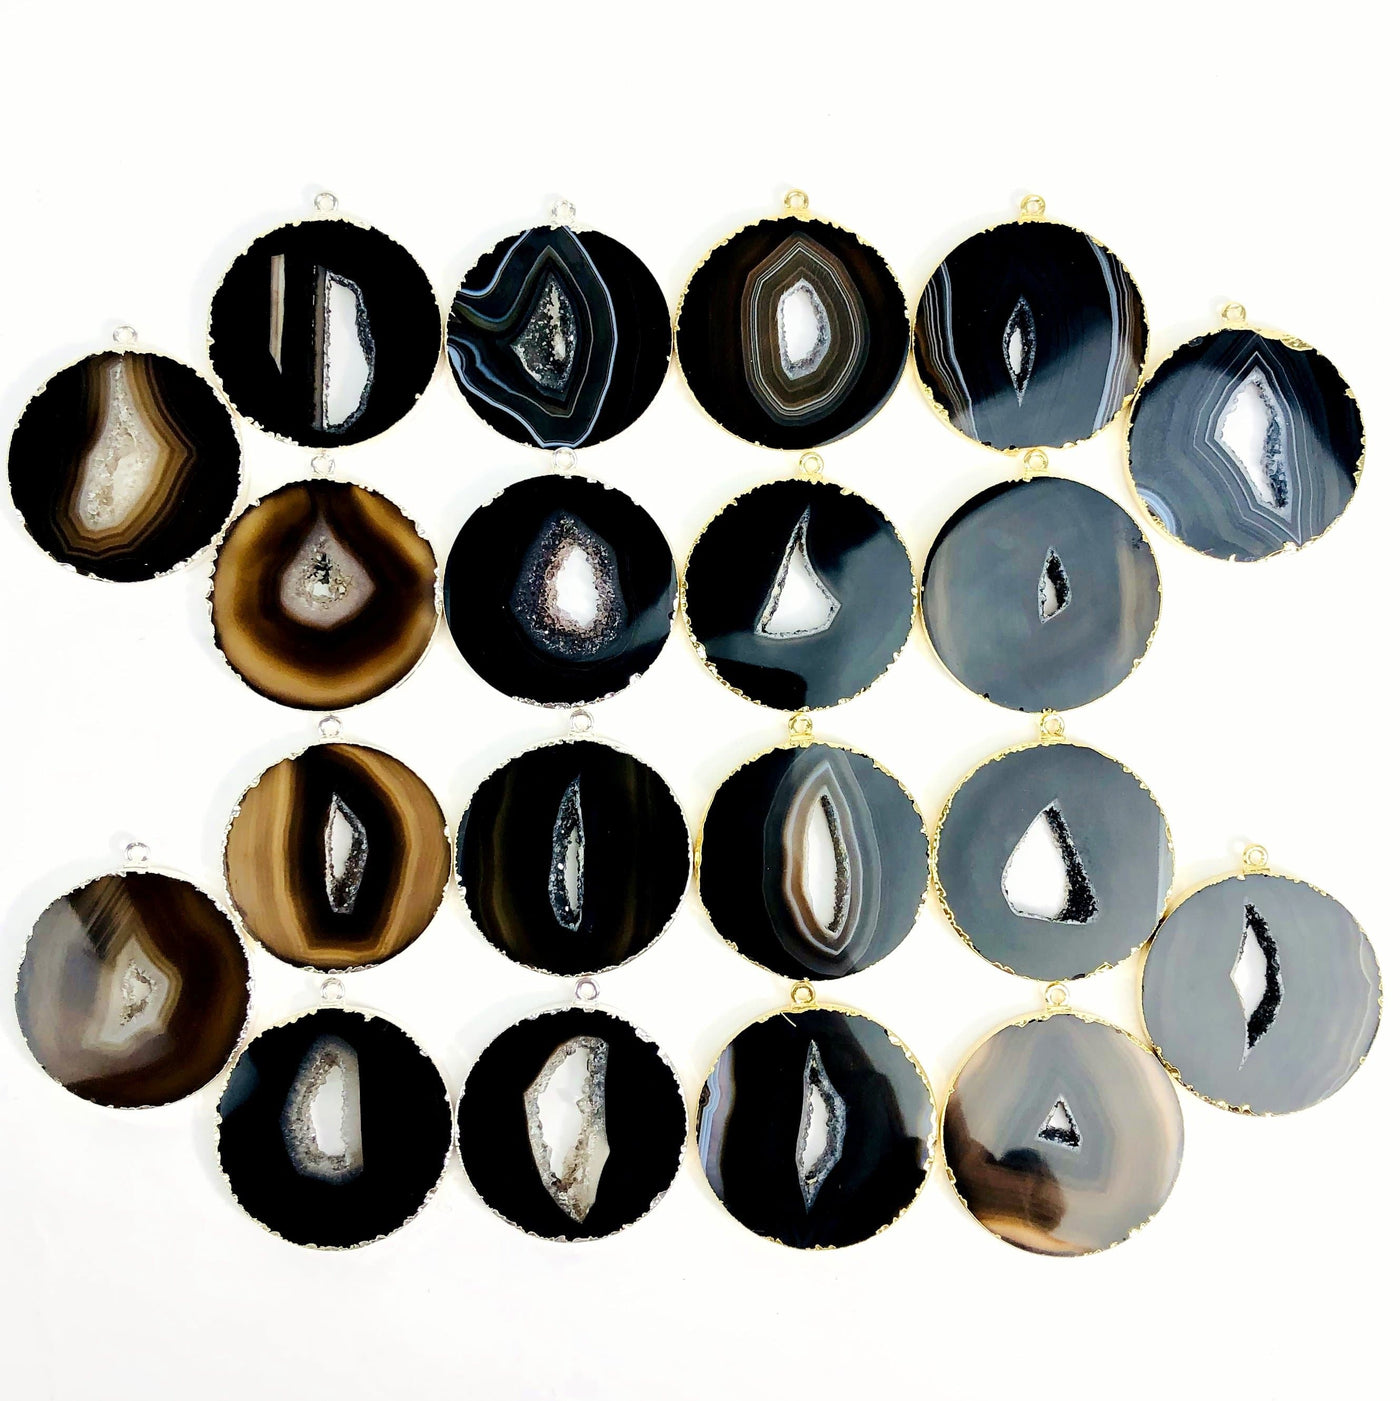 Multiple black Agate Circle Slice Pendants to show color and pattern variation.